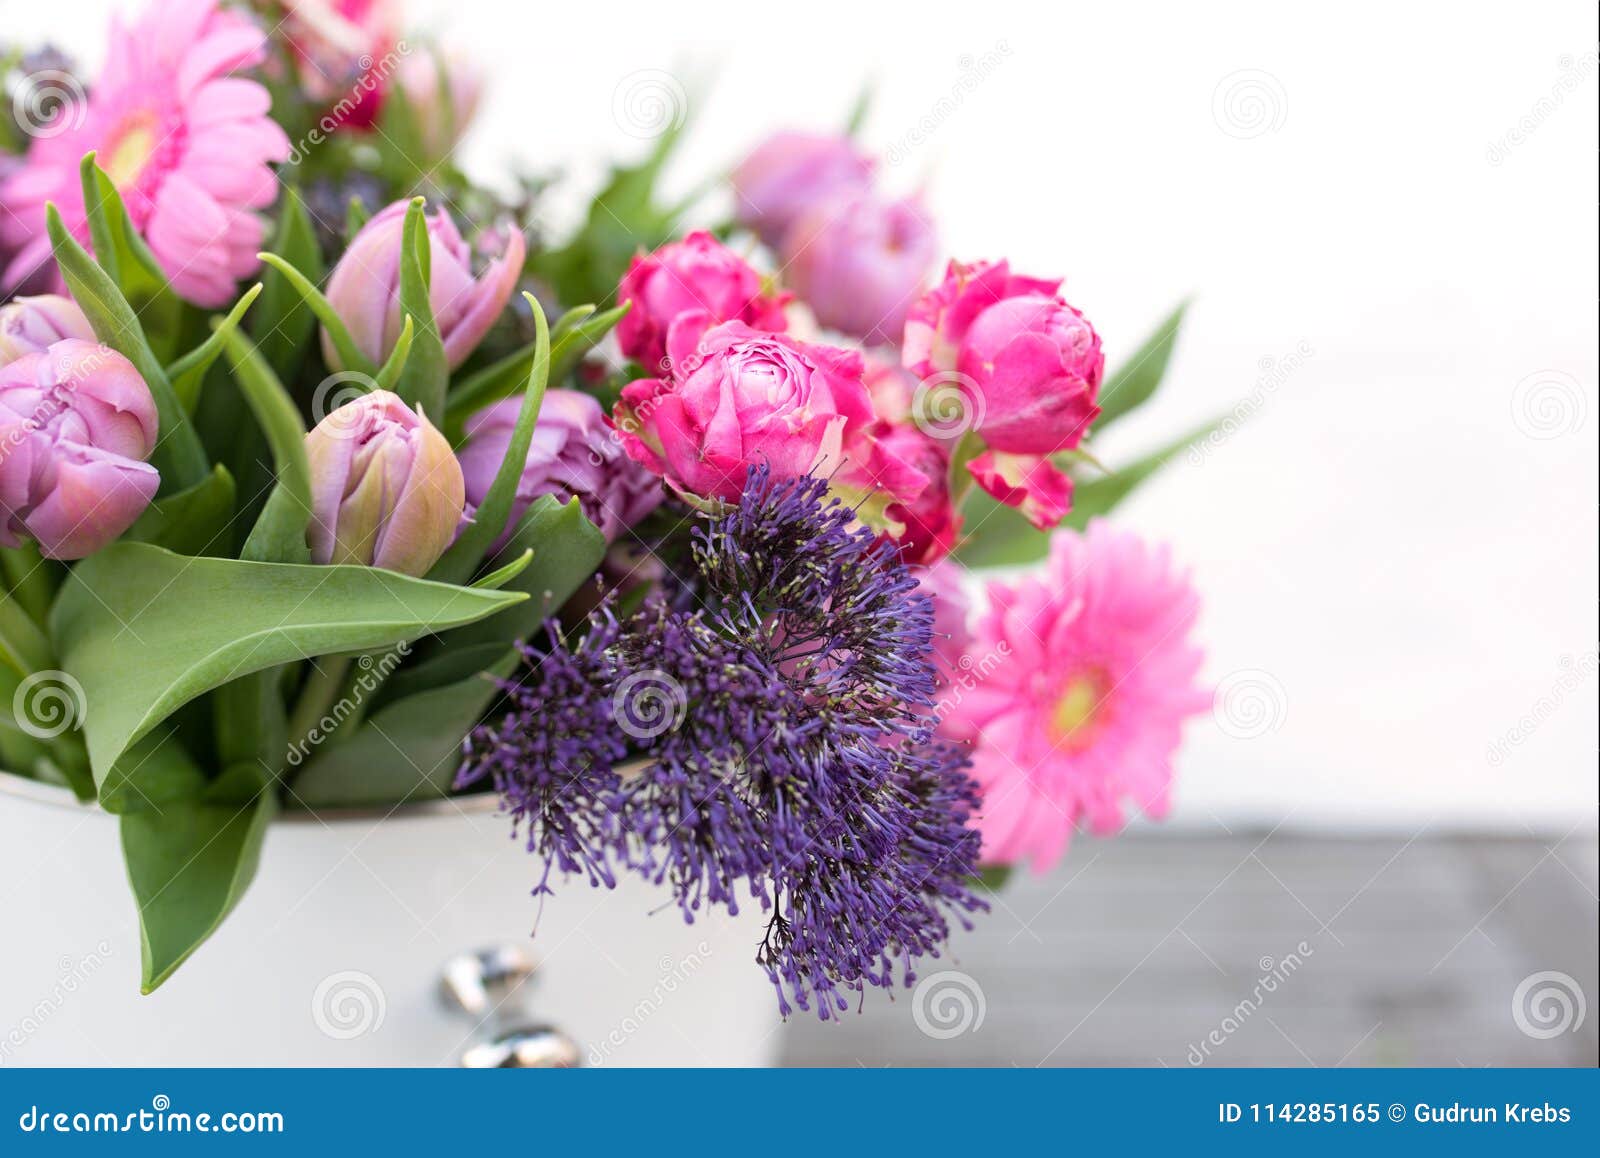 Various Spring Flowers for Mothers Day Stock Image - Image of flowers ...